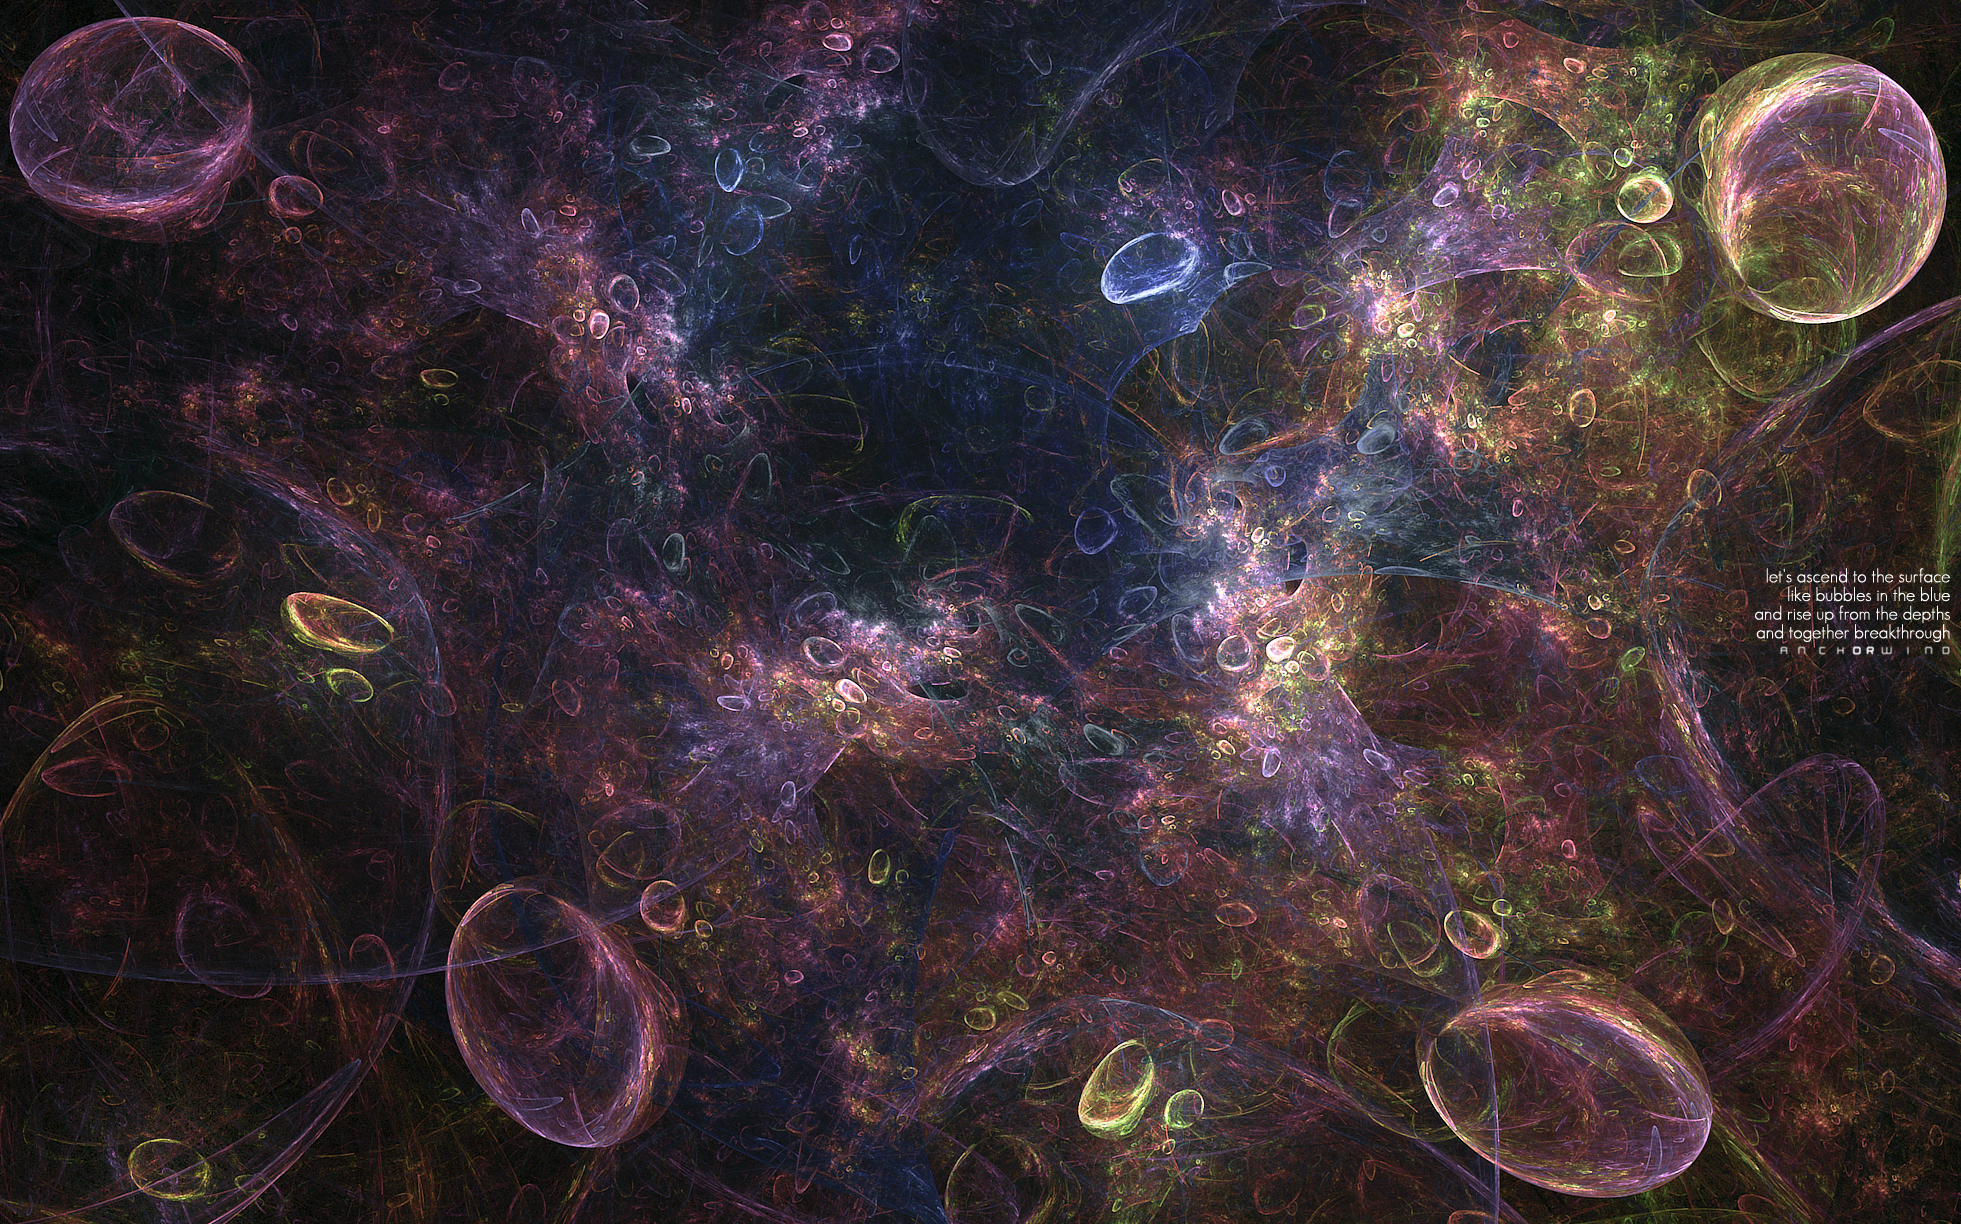 Bubbles: A Digital Art piece by Anchorwind, a disabled OIF/OEF Veteran artist, writer, and audio tinkerer.